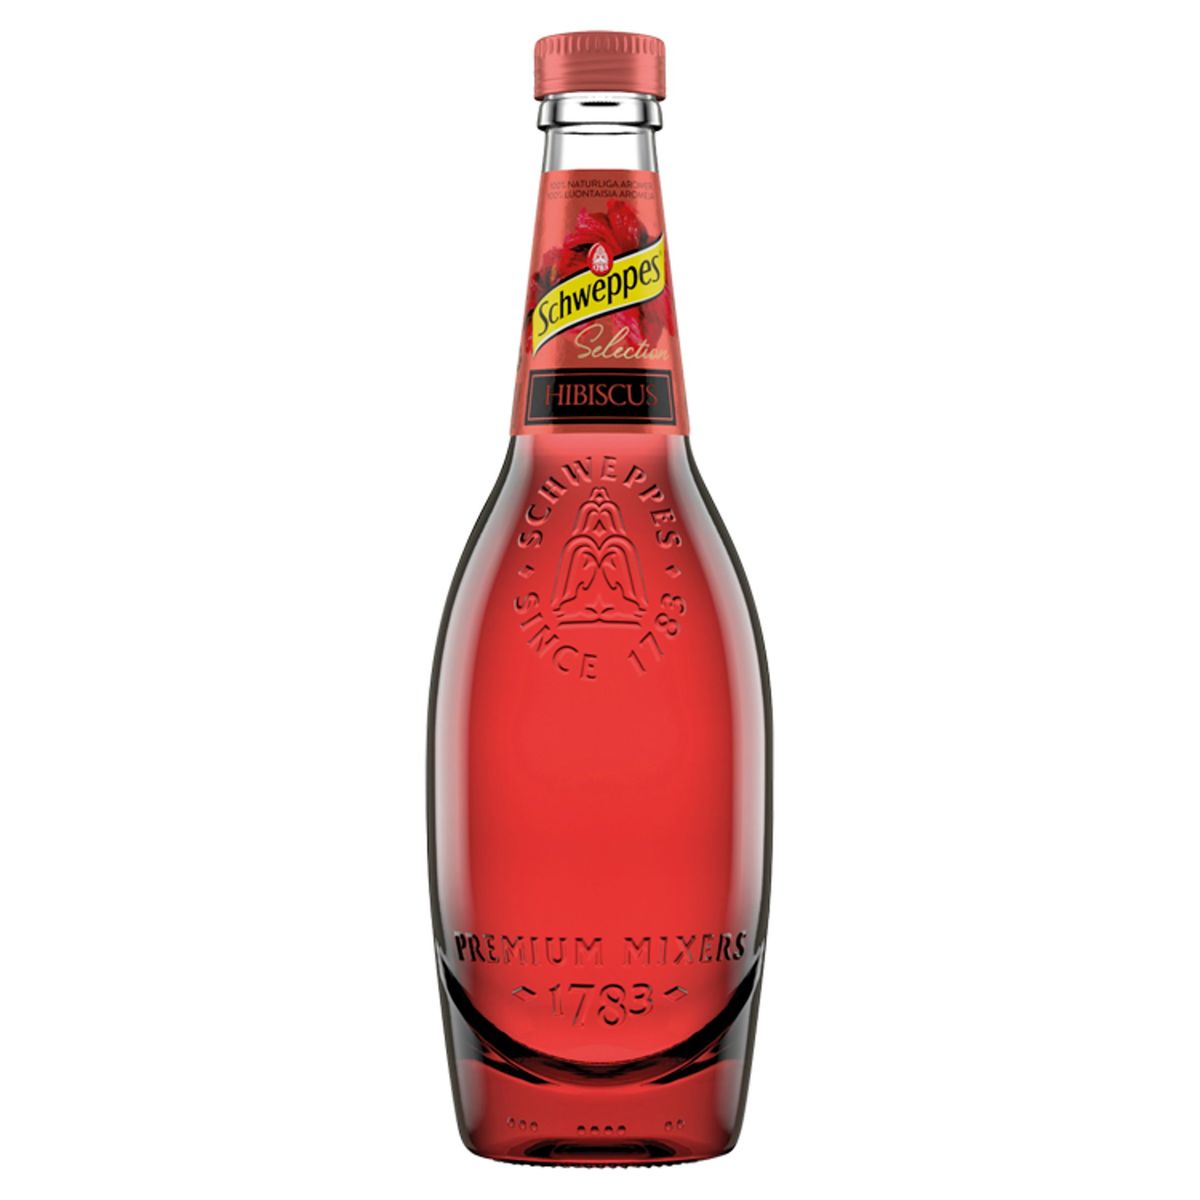 Schweppes Selection Hibscus 45 cl